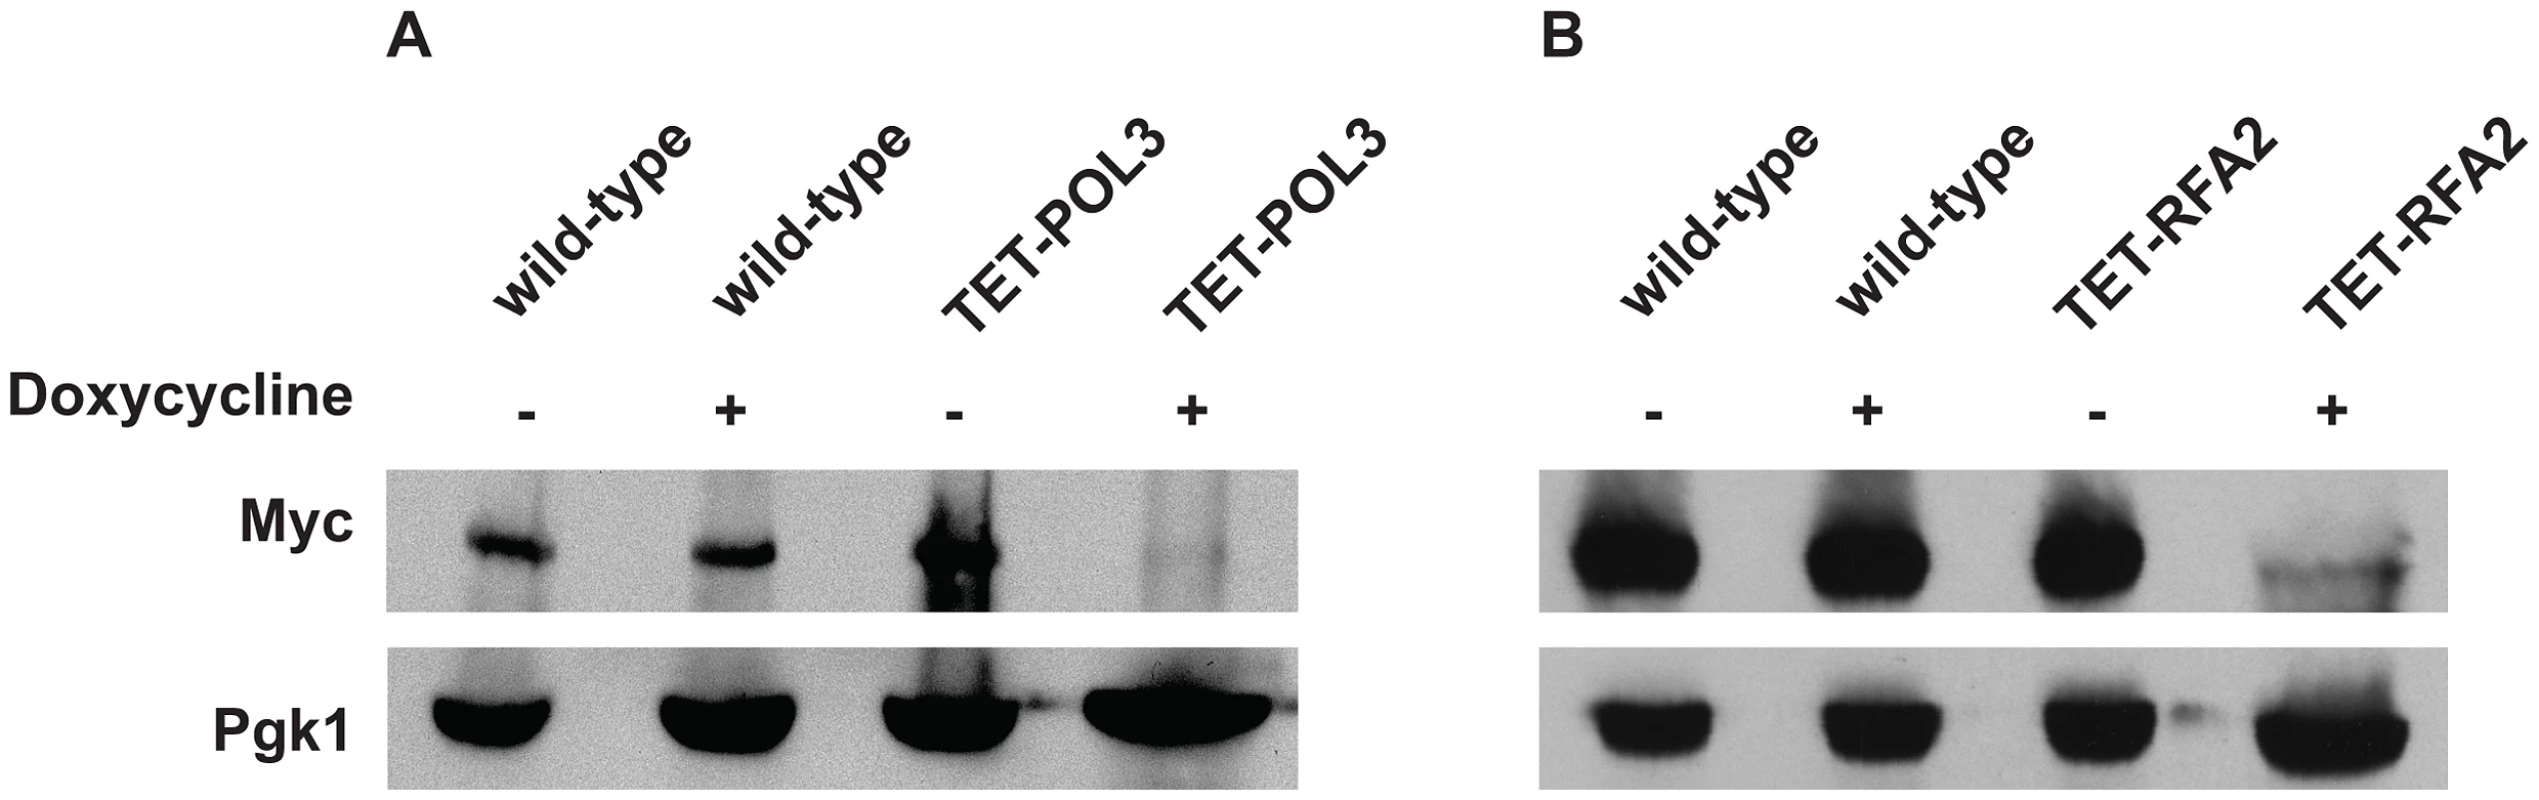 Analysis of protein levels of Pol3 and Rfa2 in the wild-type and tetracycline downregulatable strains.